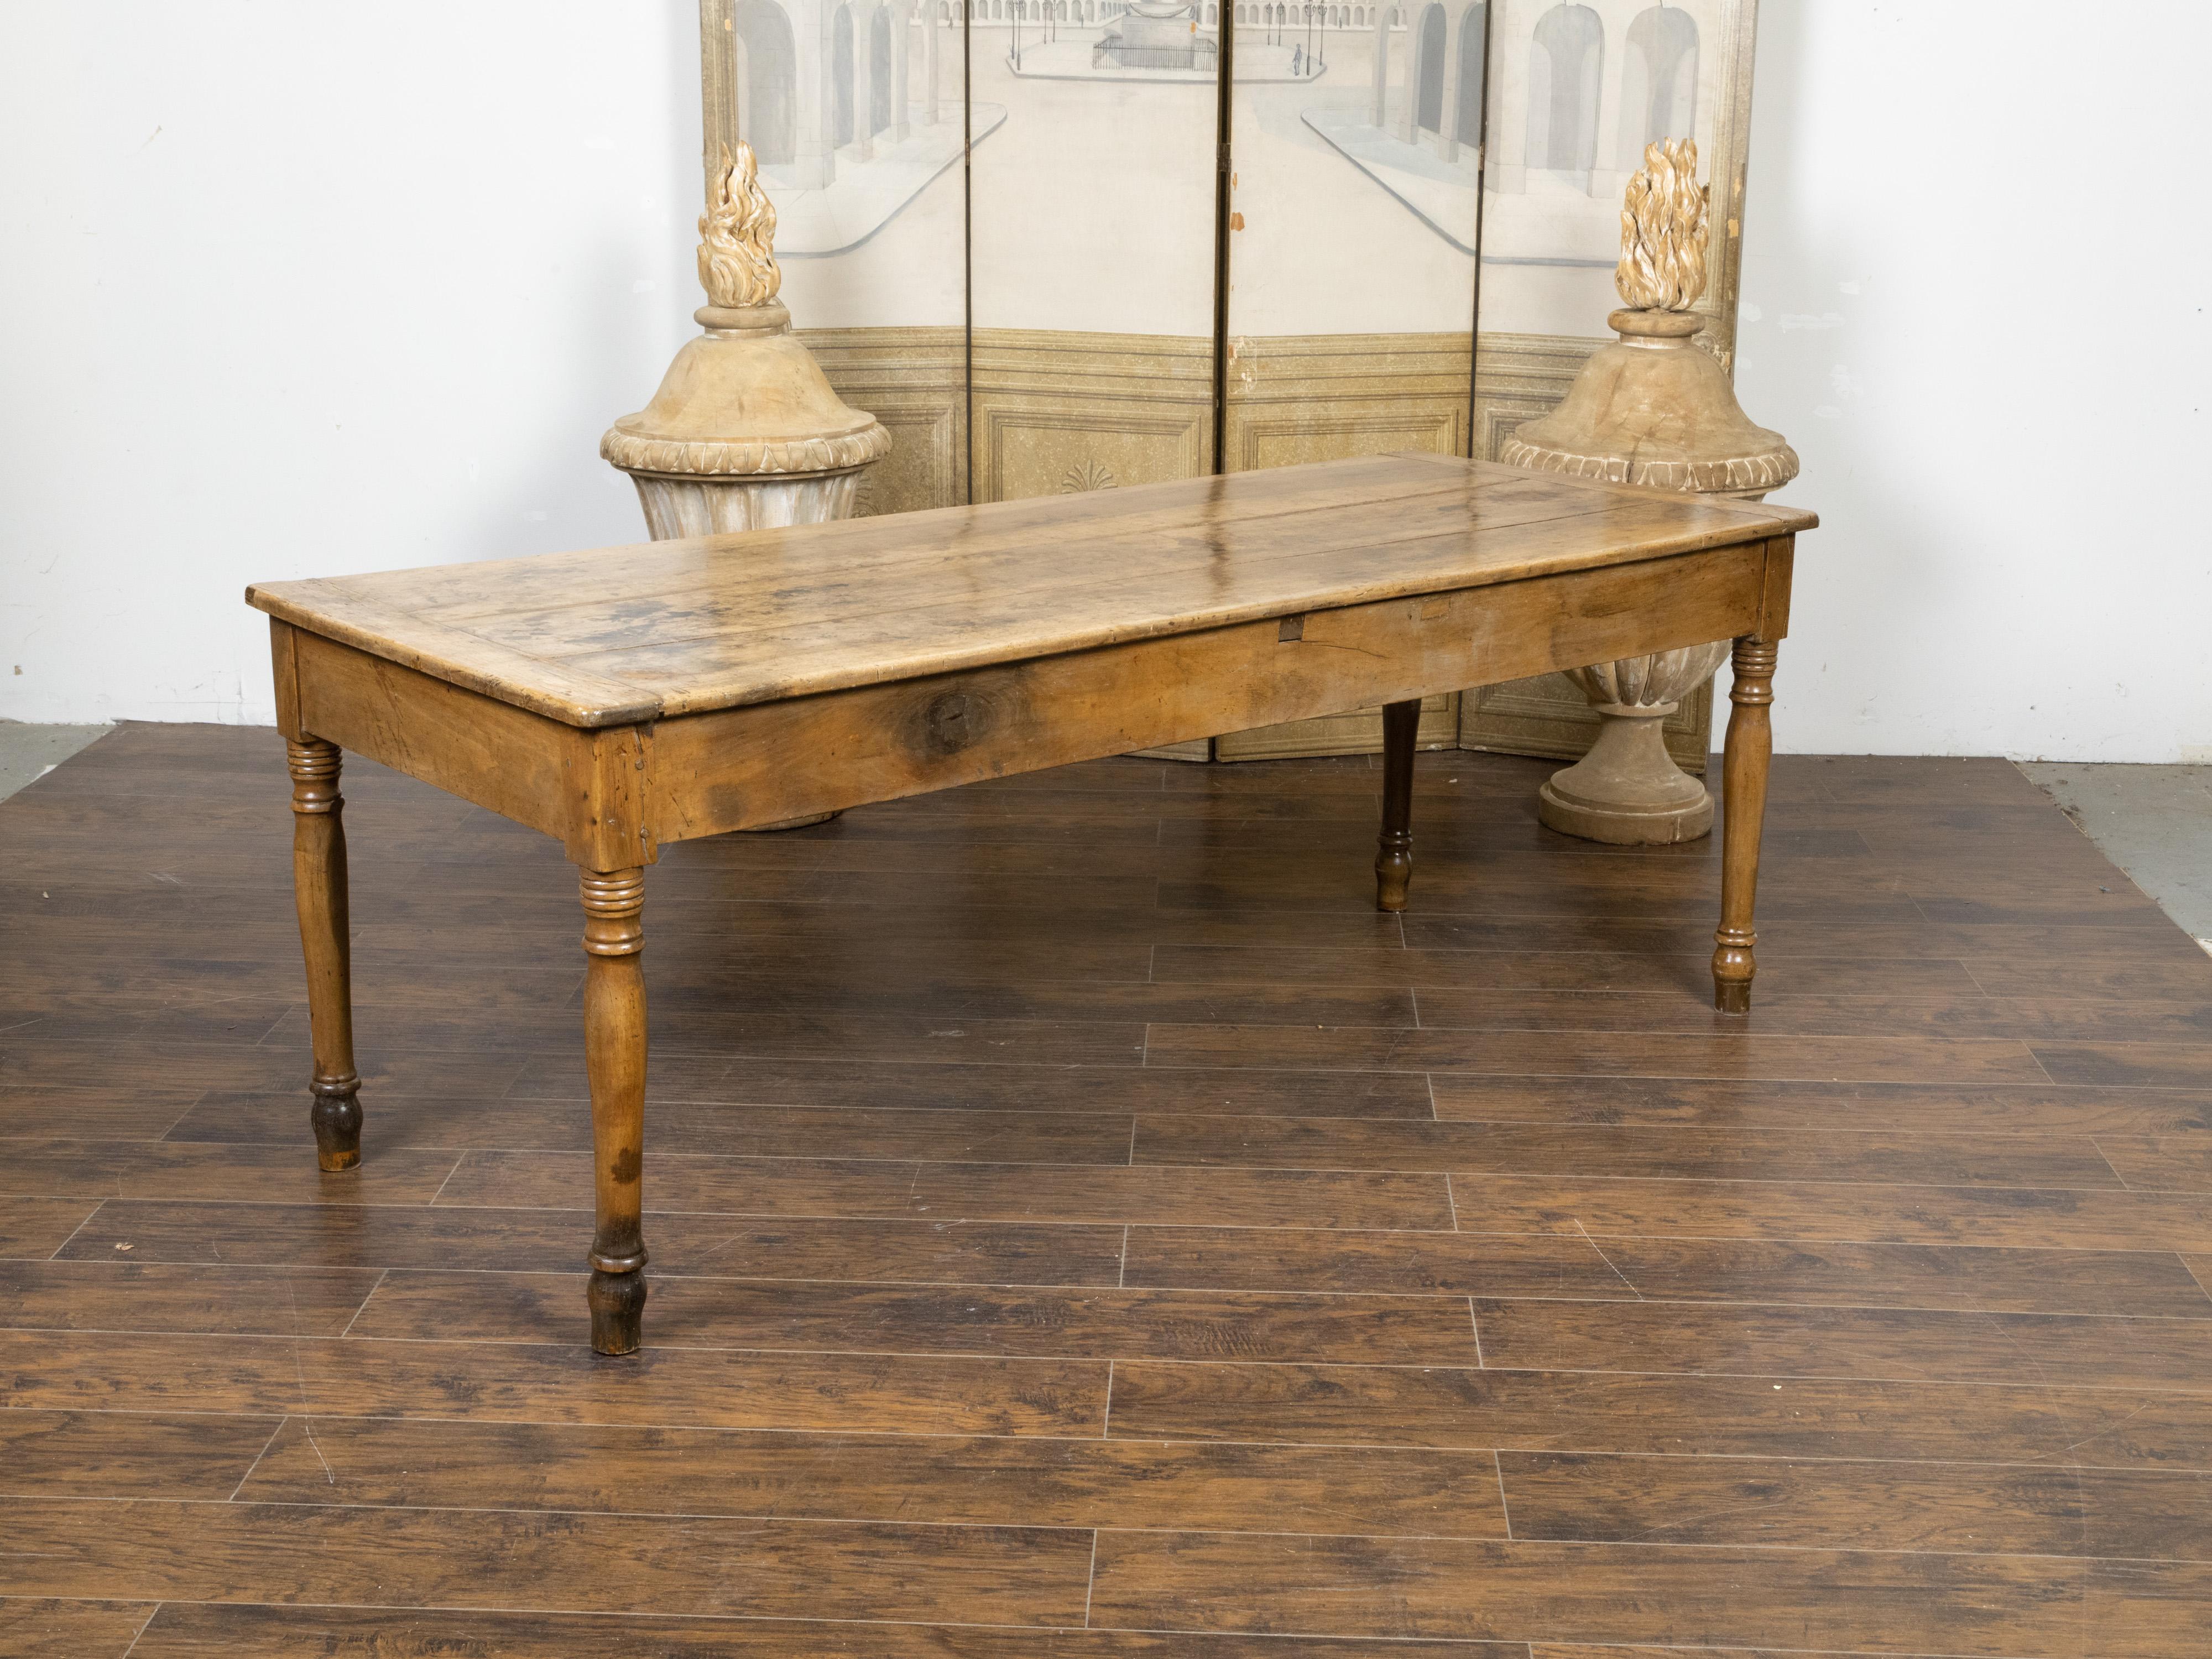 Rustic French 19th Century Walnut Farm Table with Turned Legs and Distressed Patina For Sale